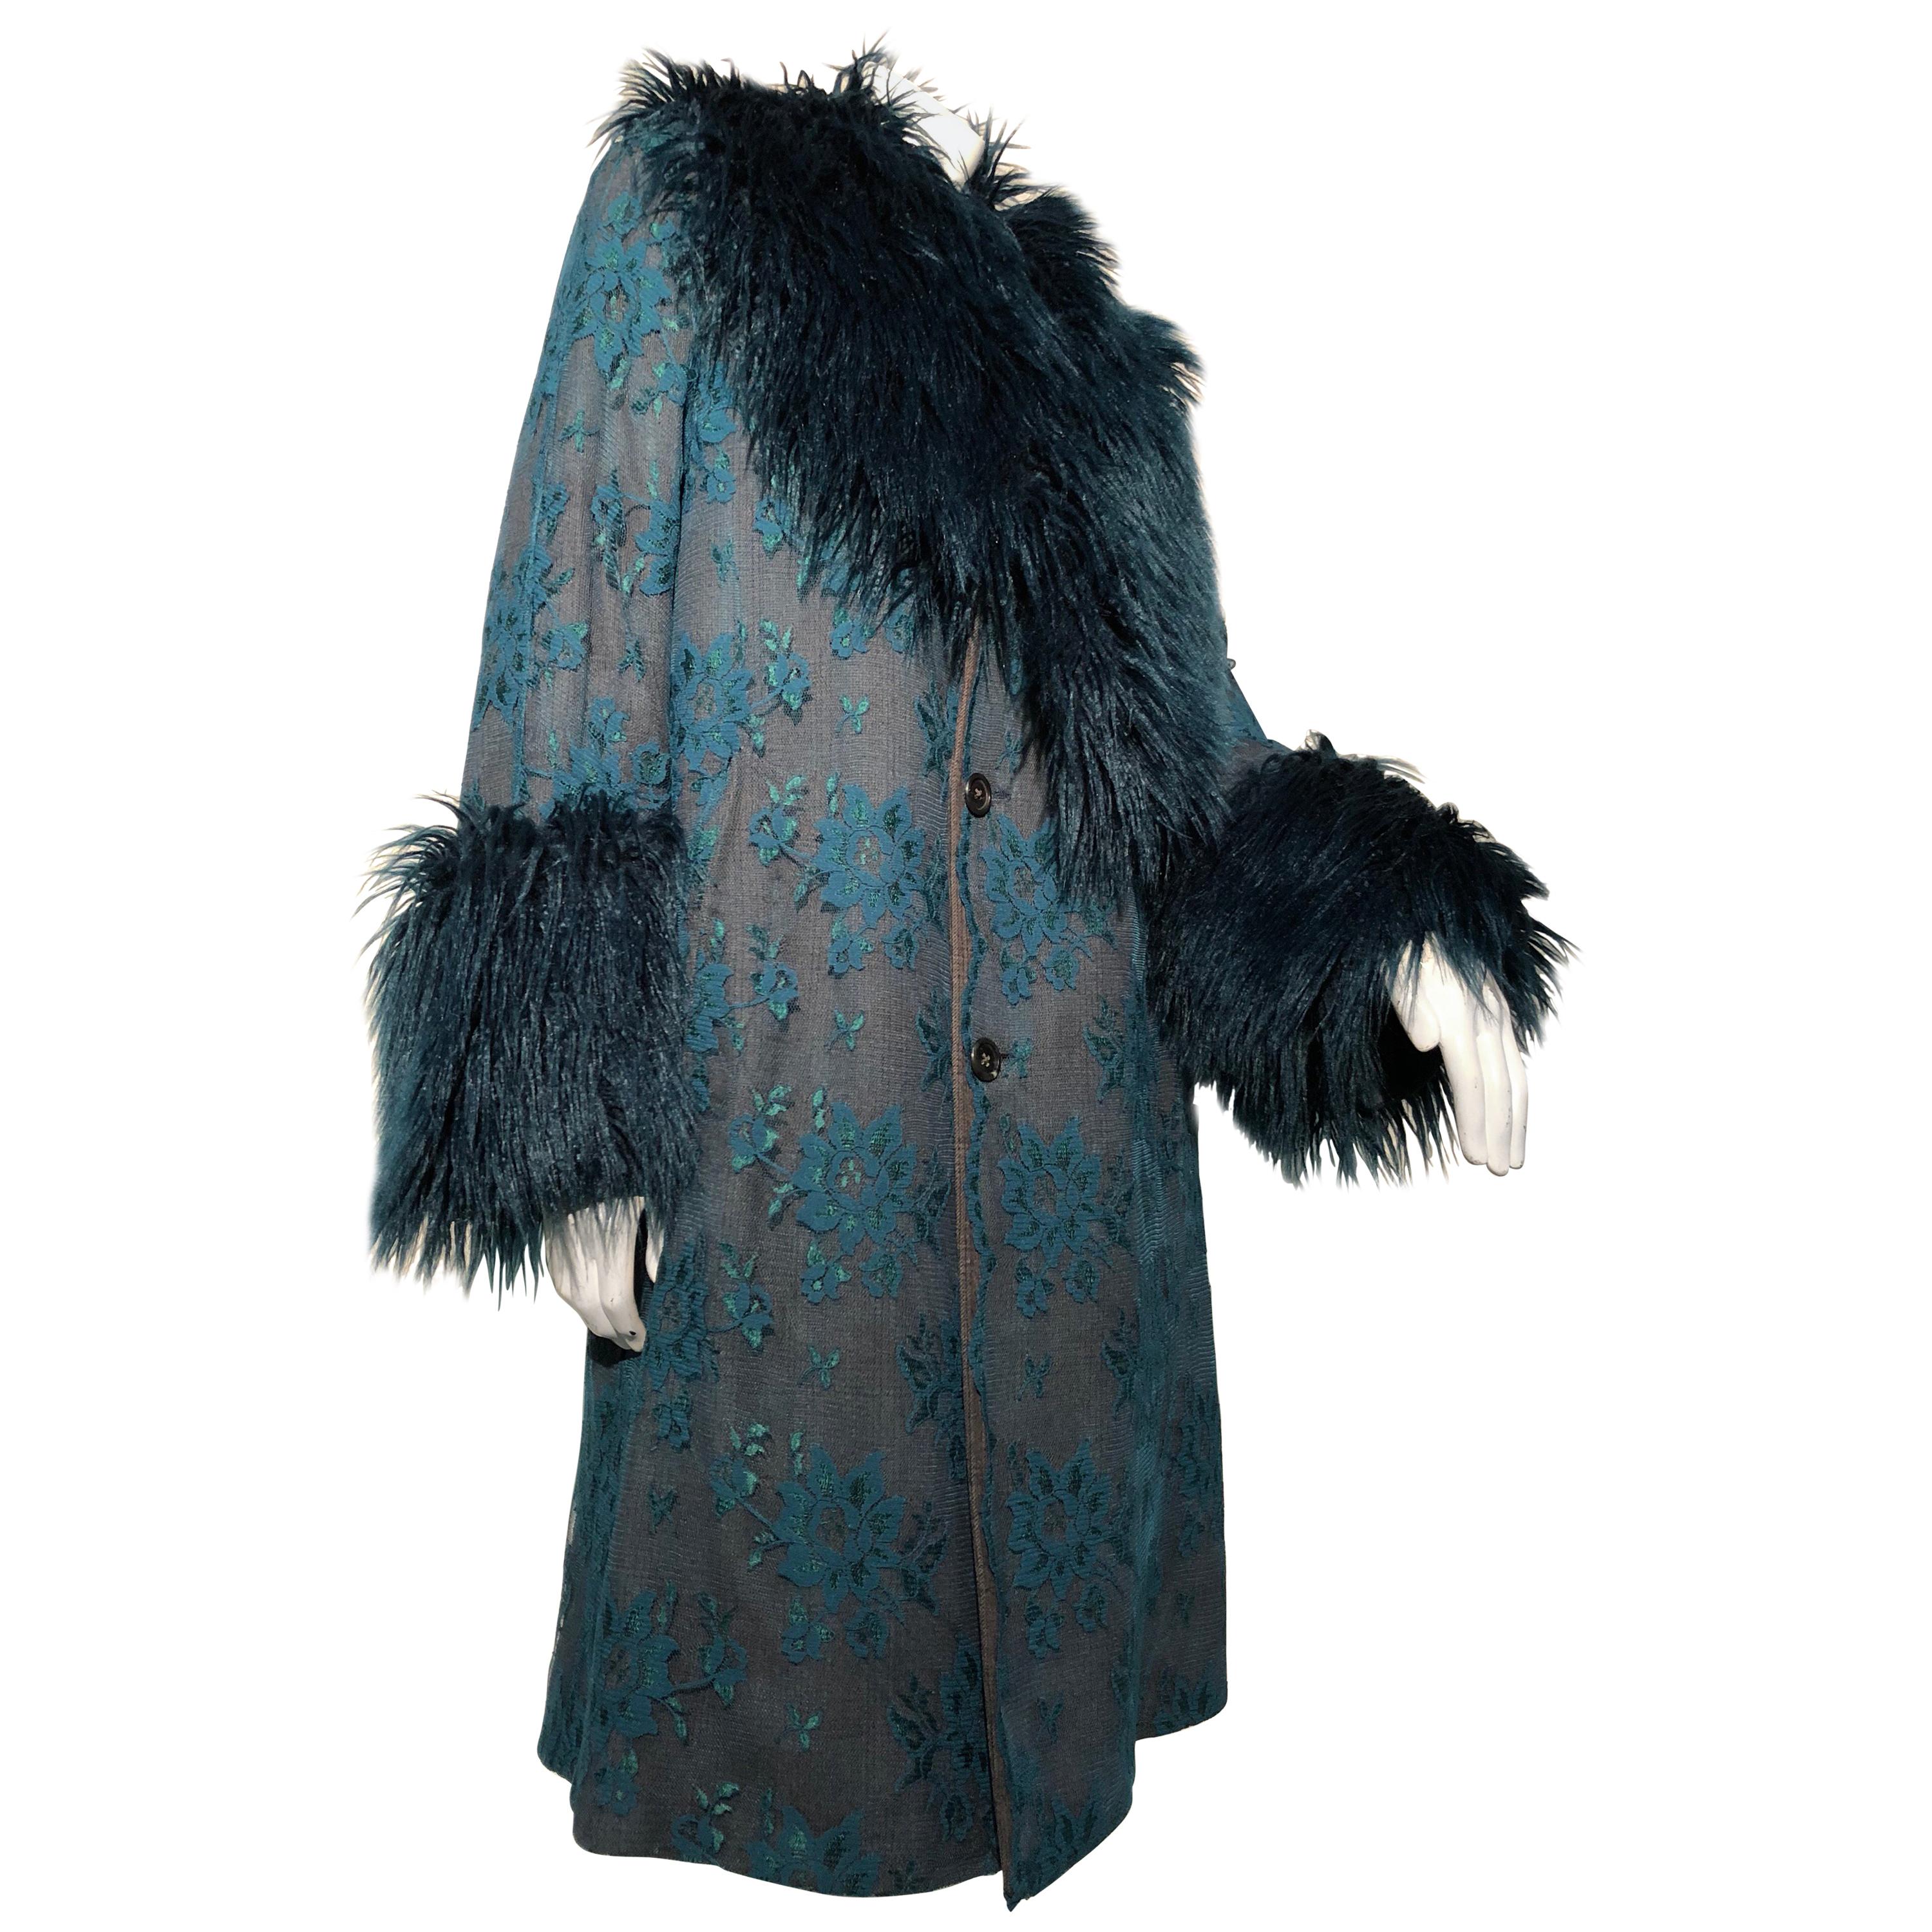 Torso Creations 1950s Grey Wool Coat W/ Teal Lace Overlay & Coordinated Faux Fur